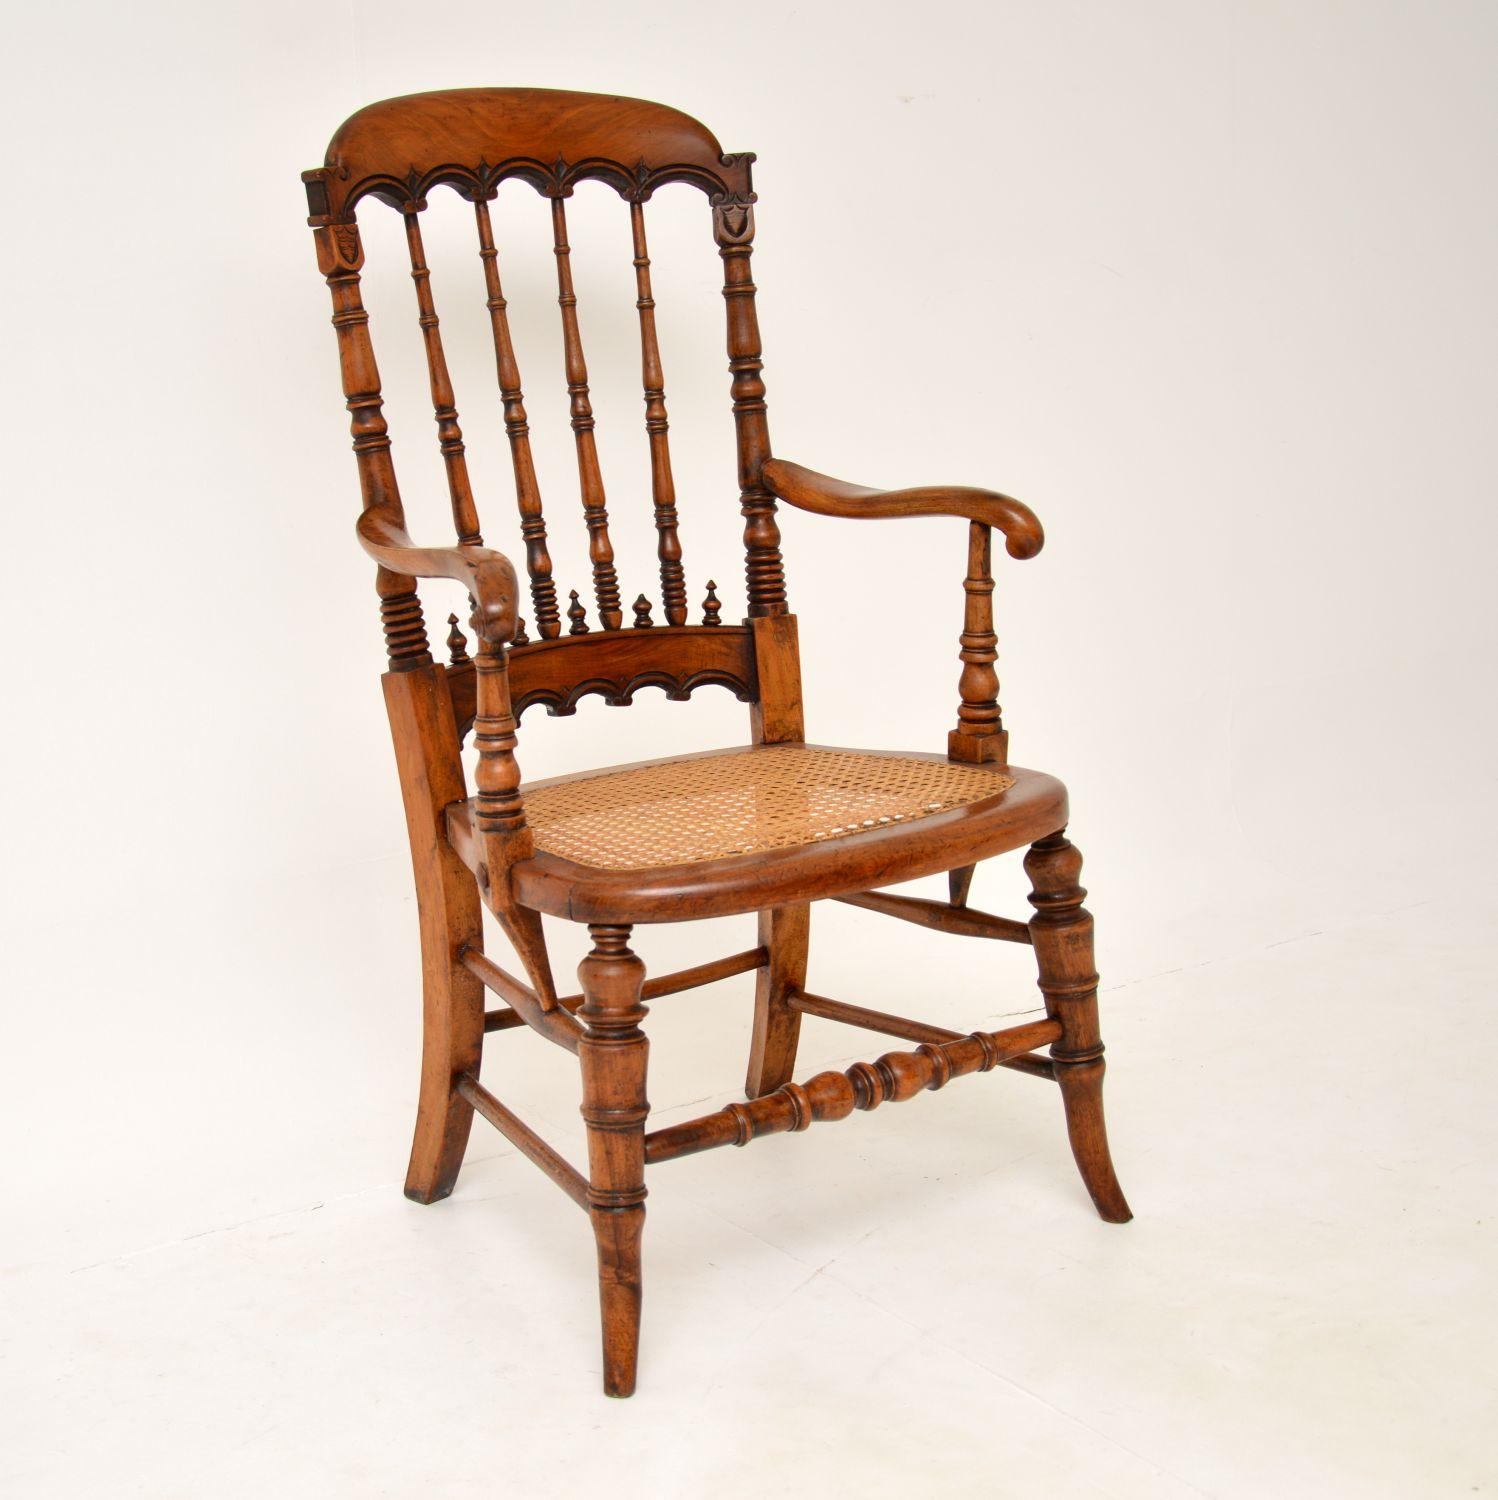 An extremely beautiful Victorian armchair which I think is solid elm. This was made in England, it dates from around the 1860-1880 period.

It is of amazing quality and has a stunning design. The frame is constructed of wonderfully turned sections